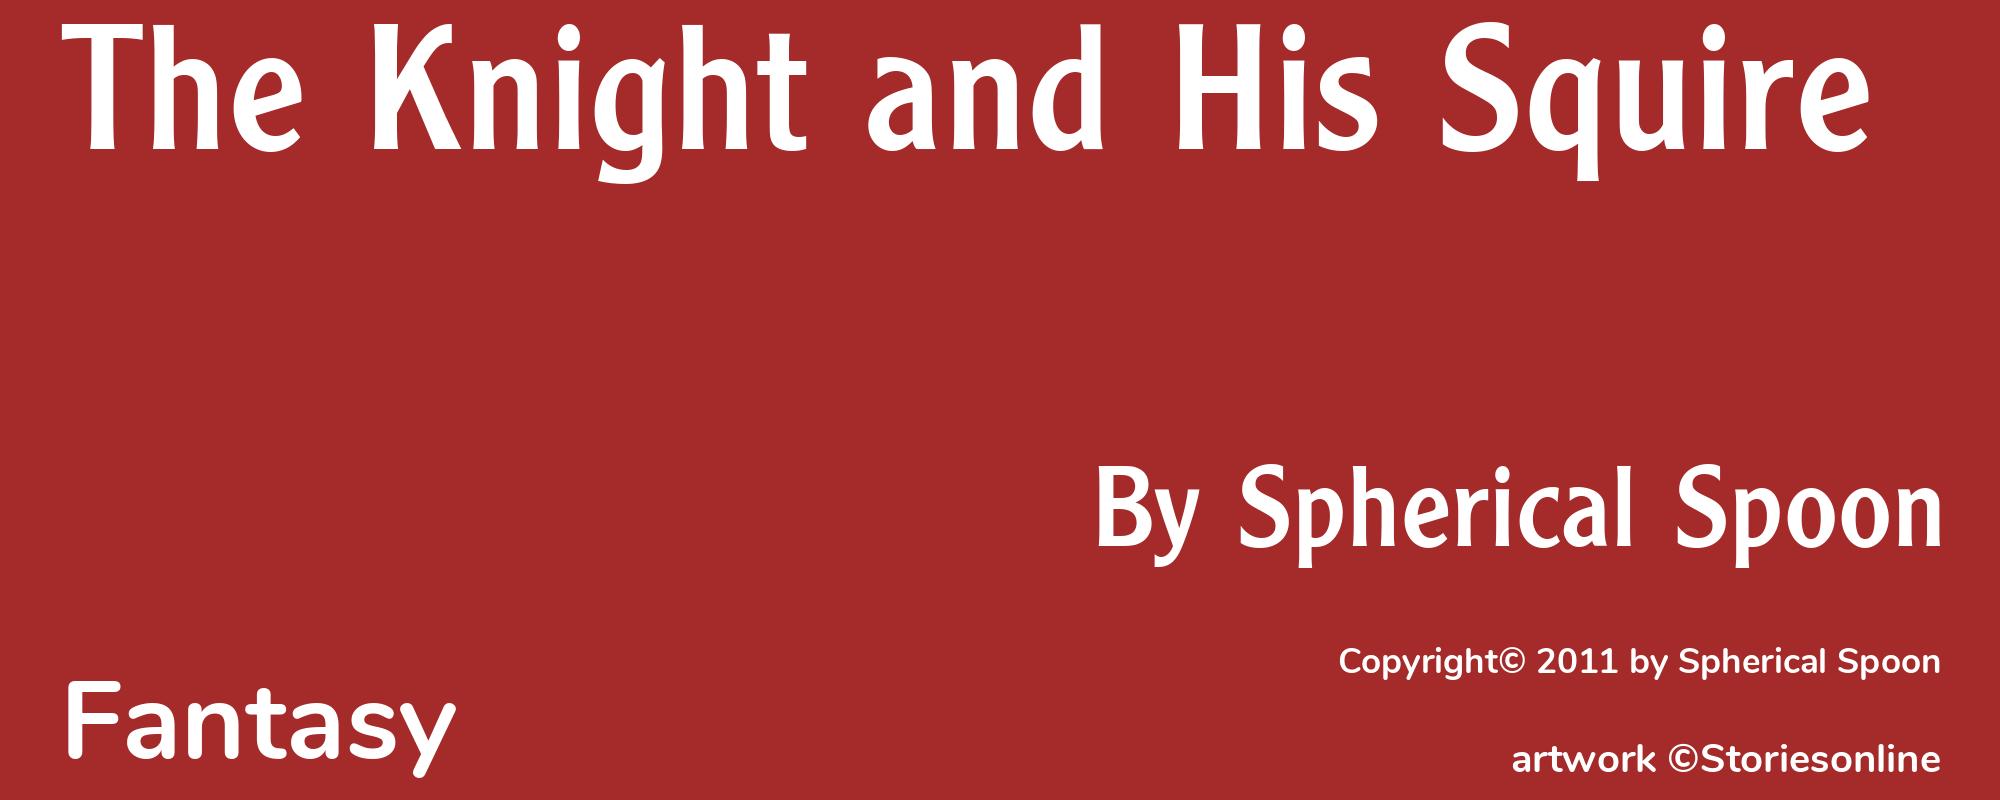 The Knight and His Squire - Cover